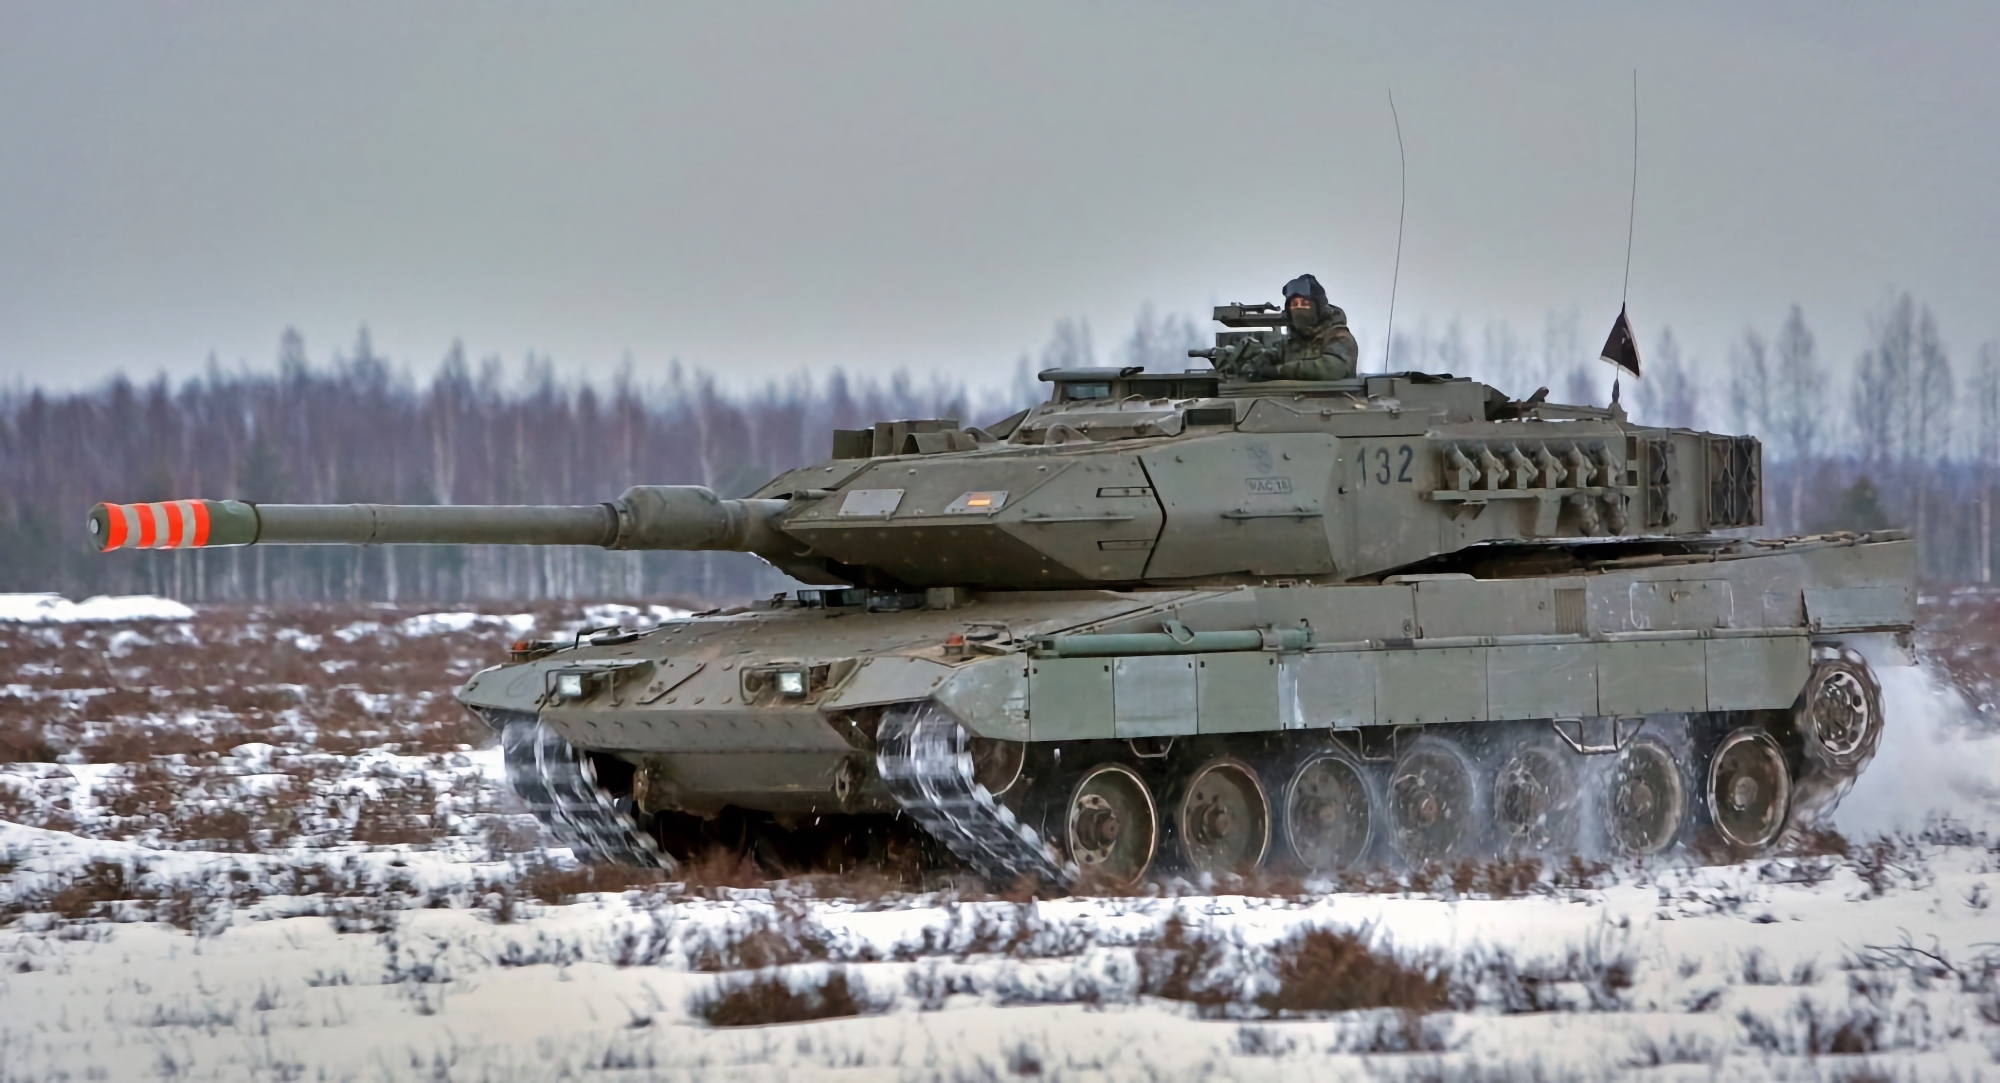 It's official: Spain decides to give Ukraine 10 Leopard 2 tanks instead of 6